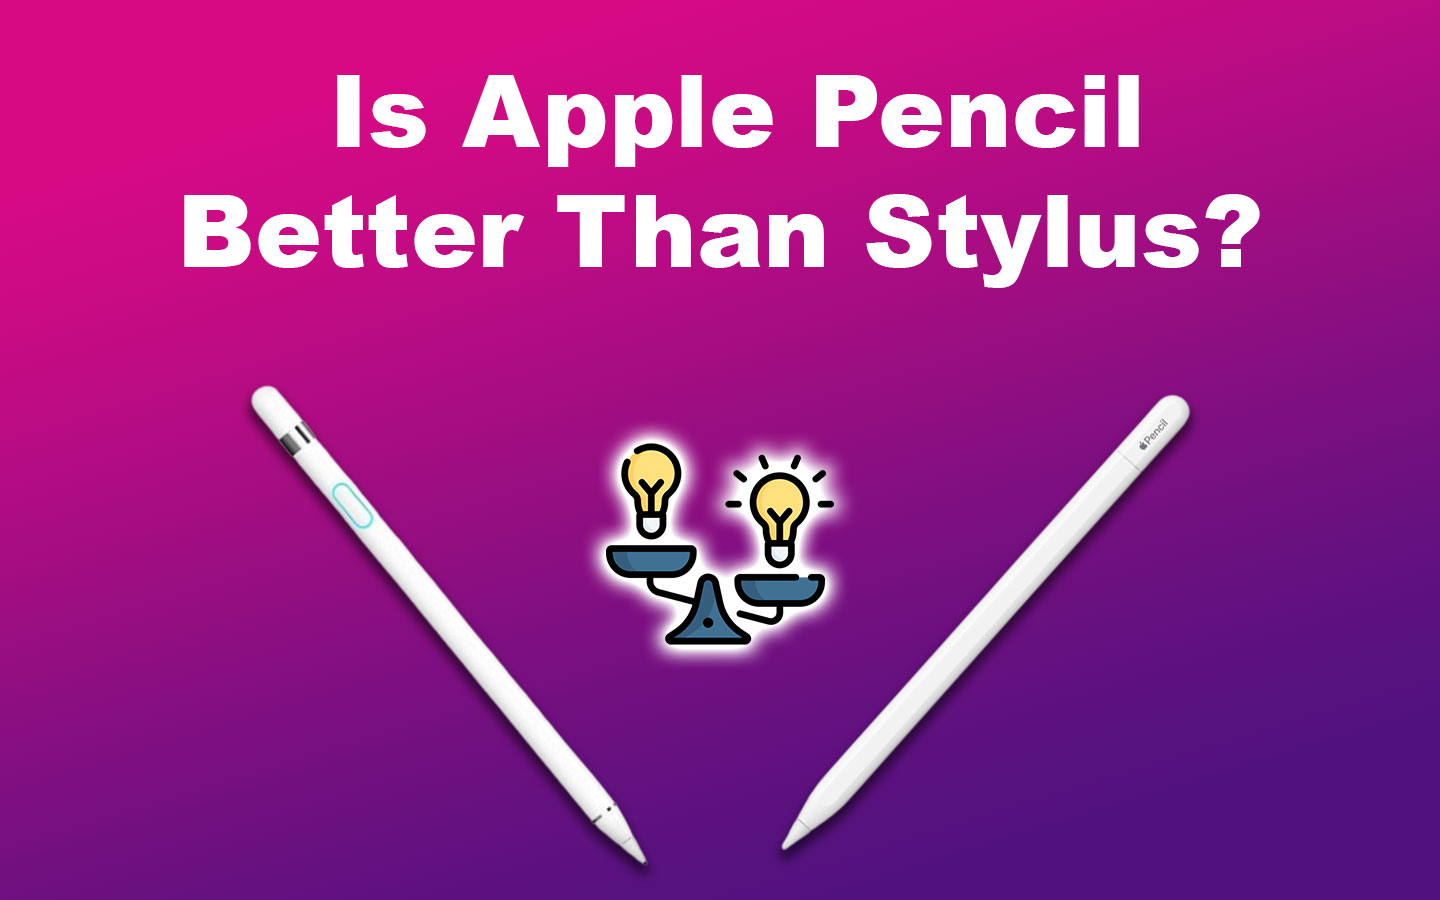 Is Apple Pencil Better Than Stylus